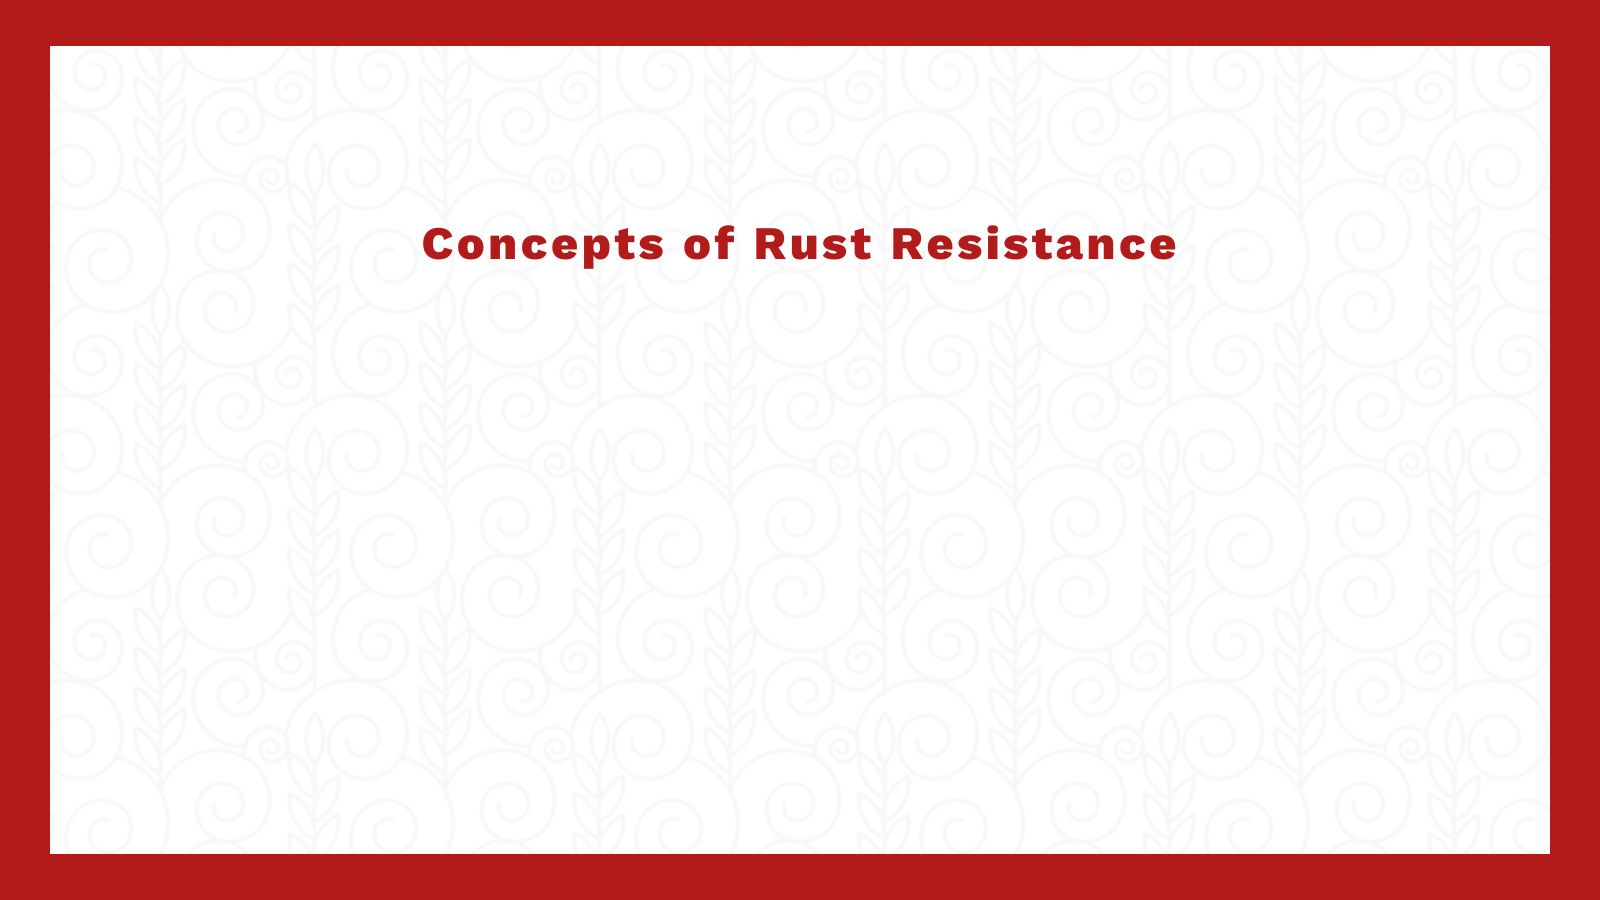 Concepts of Rust Resistance